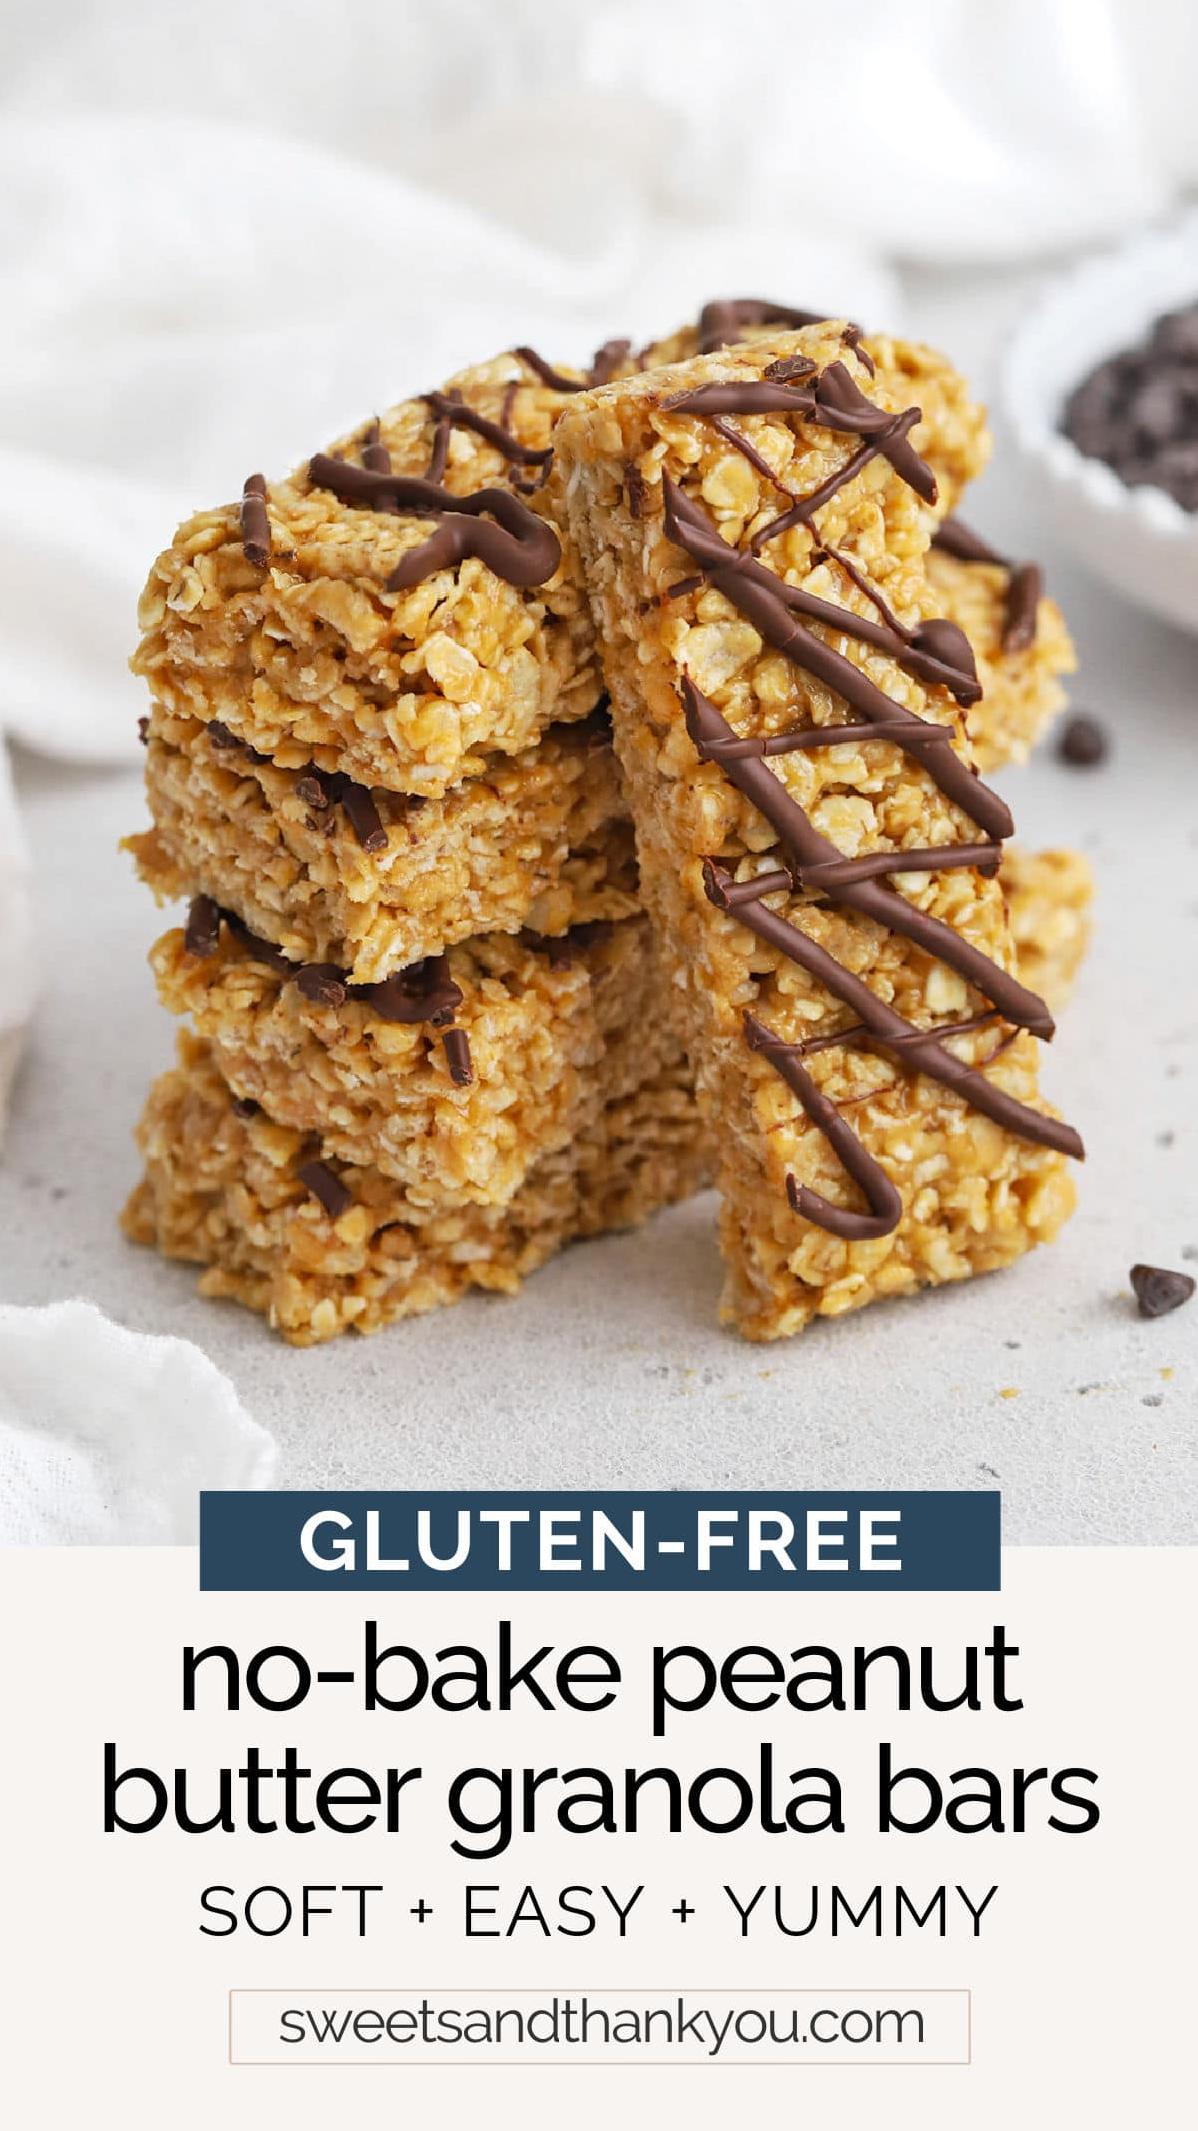  Get your daily dose of protein with these homemade granola bars